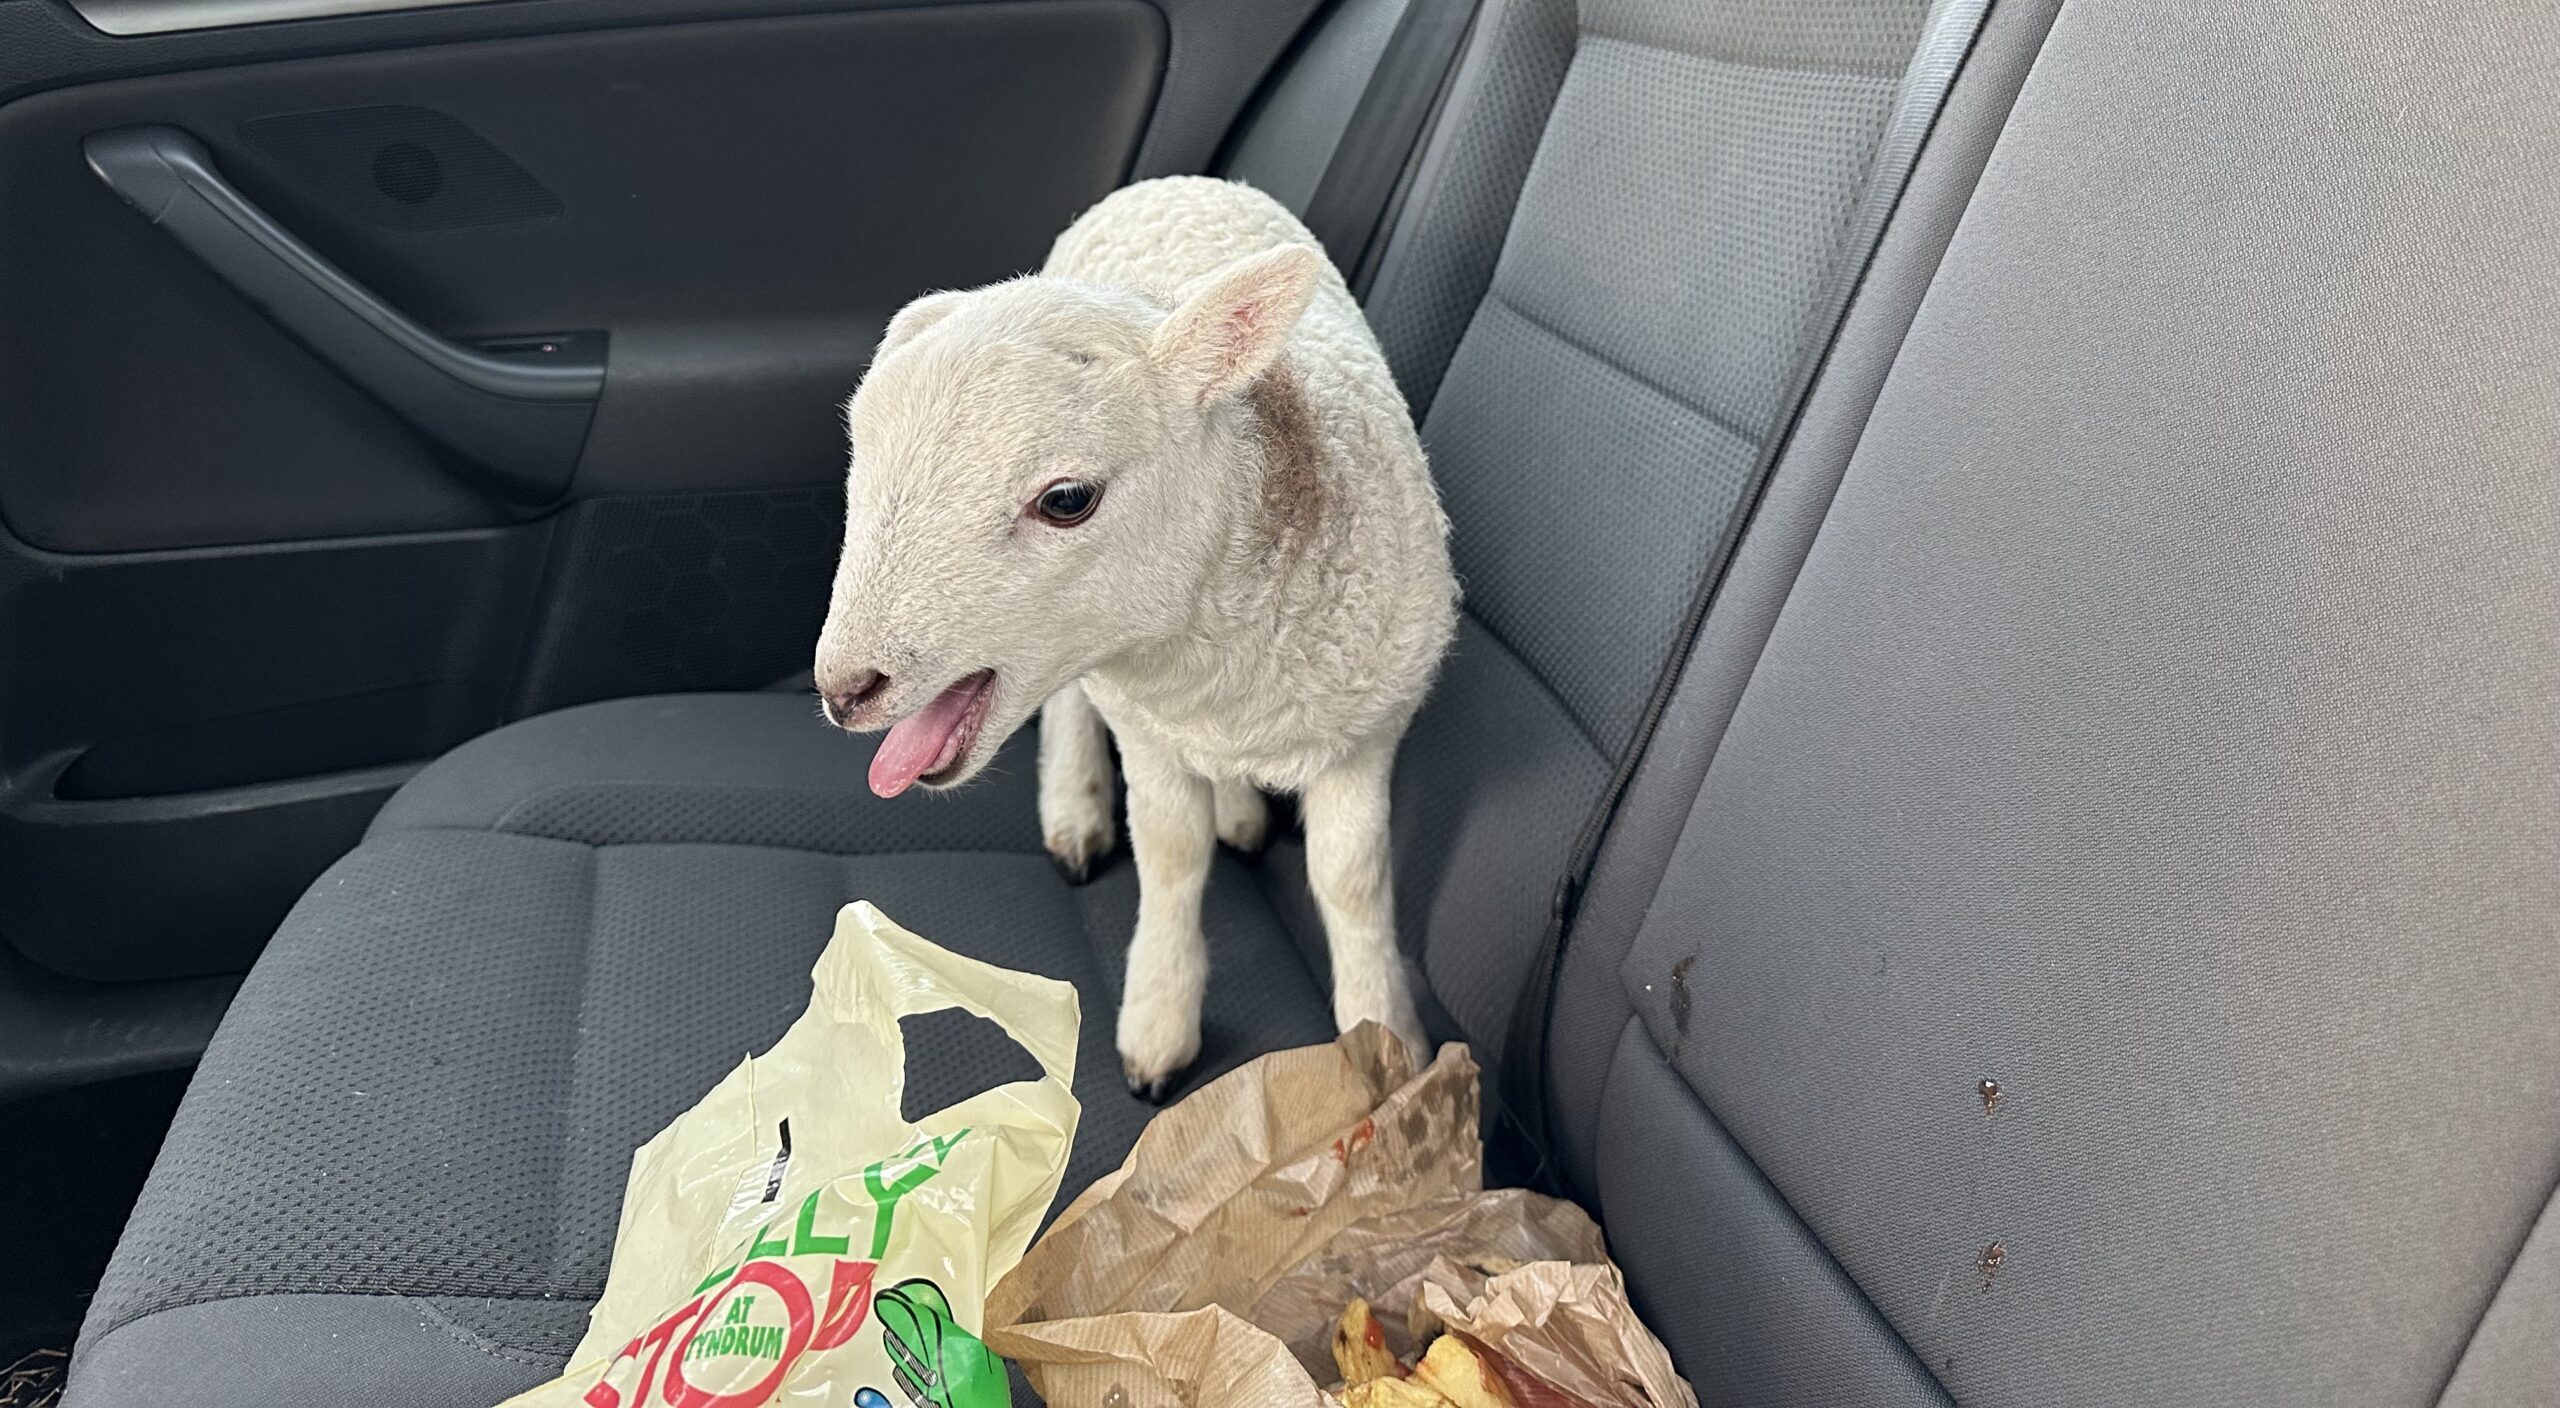 Police discovered a lamb in a car